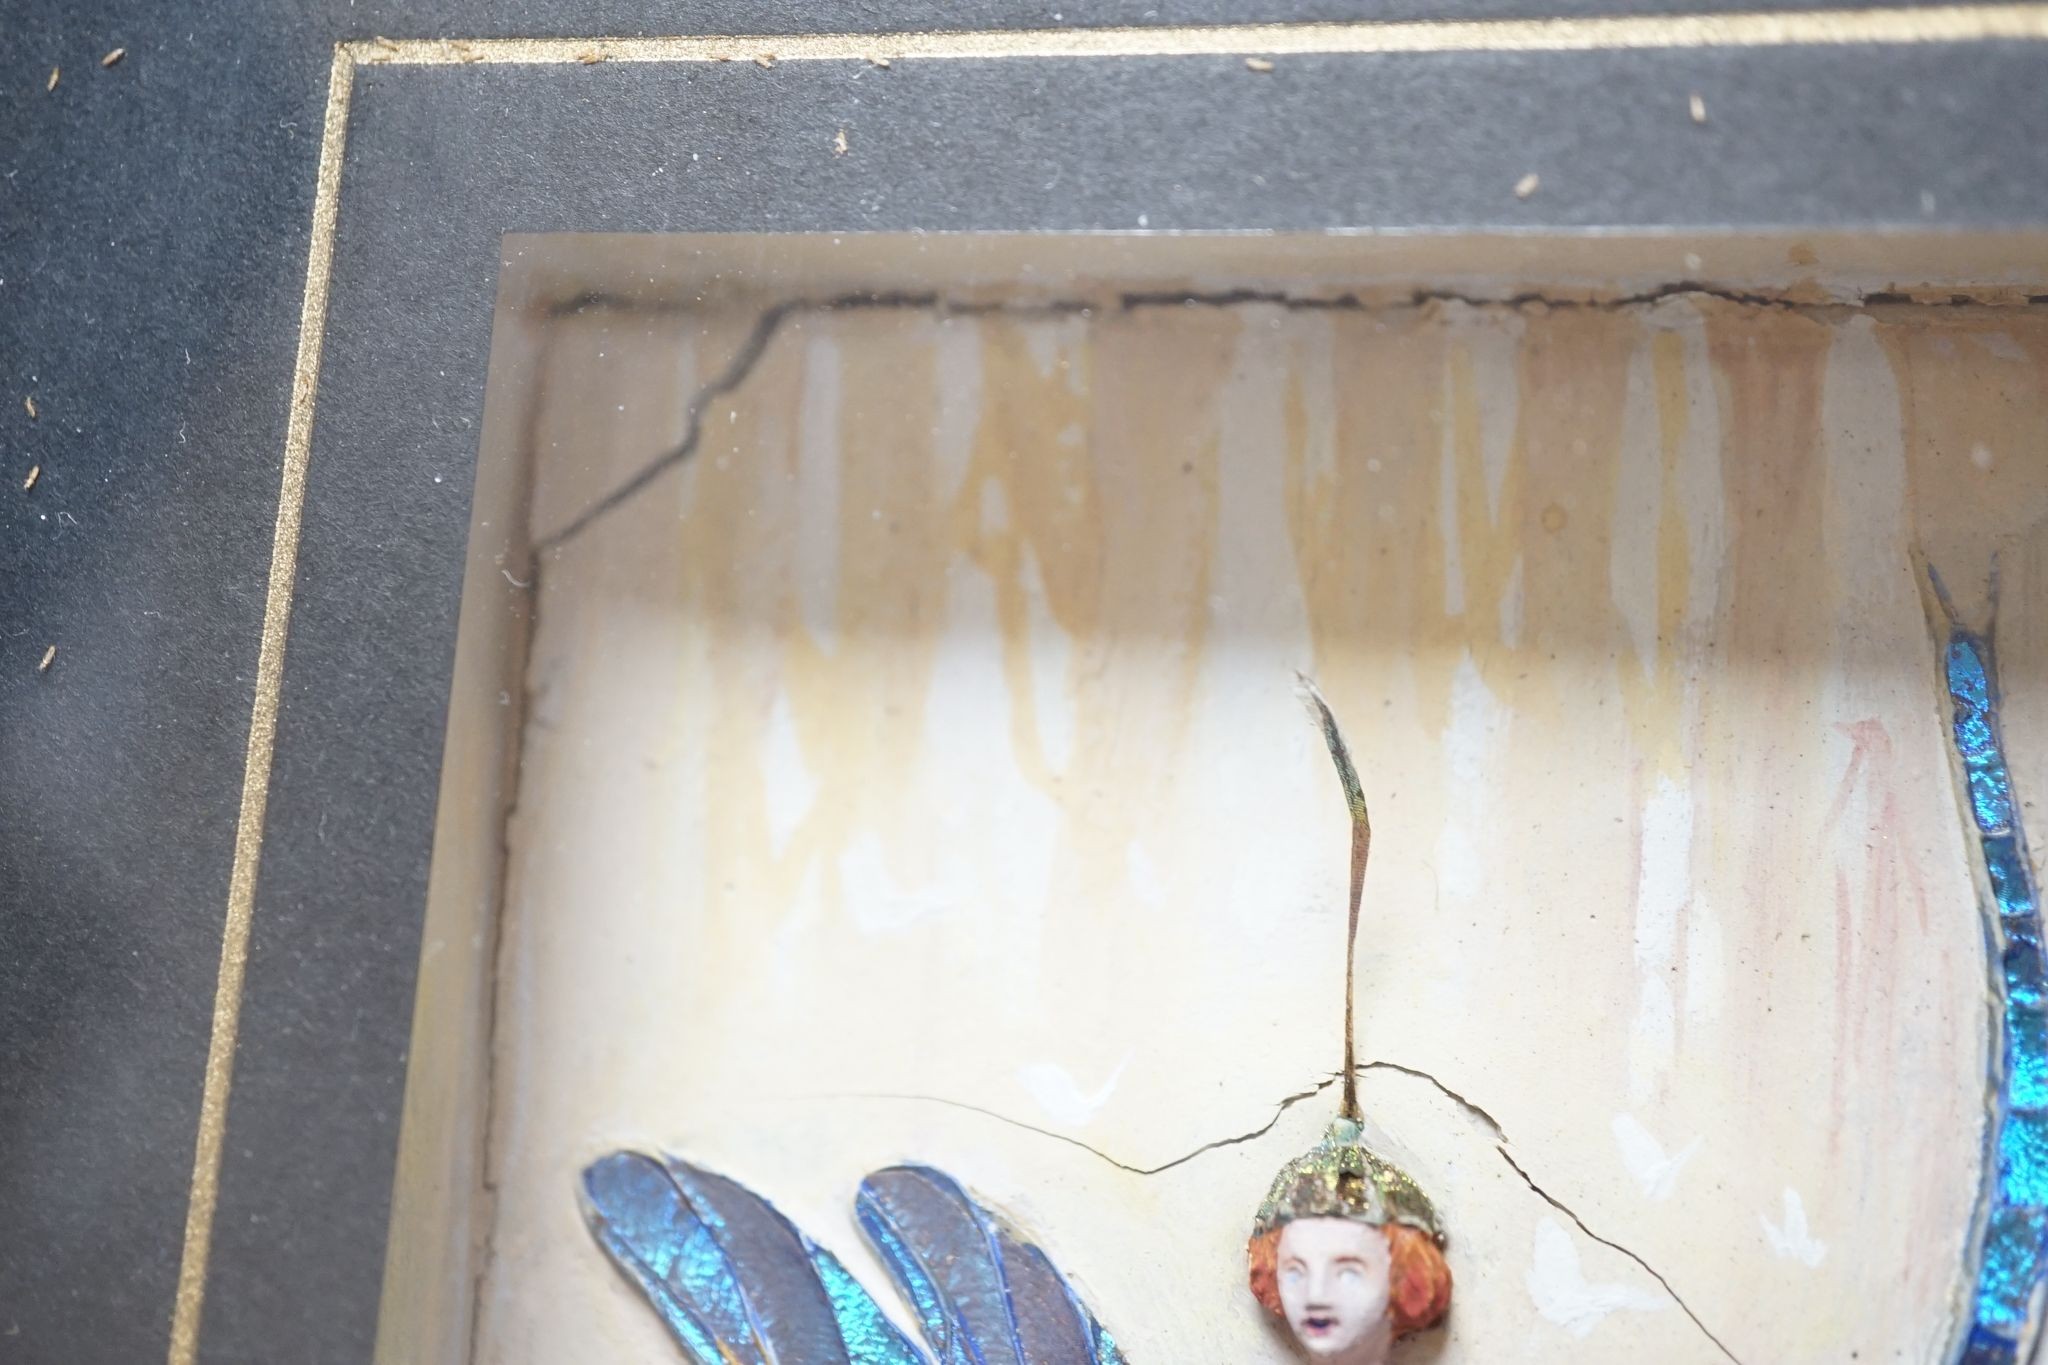 A pair of morpho butterfly wing nymph diorama, signed Gaydon King, Pat. App. For 19907/29, c. - Image 6 of 7